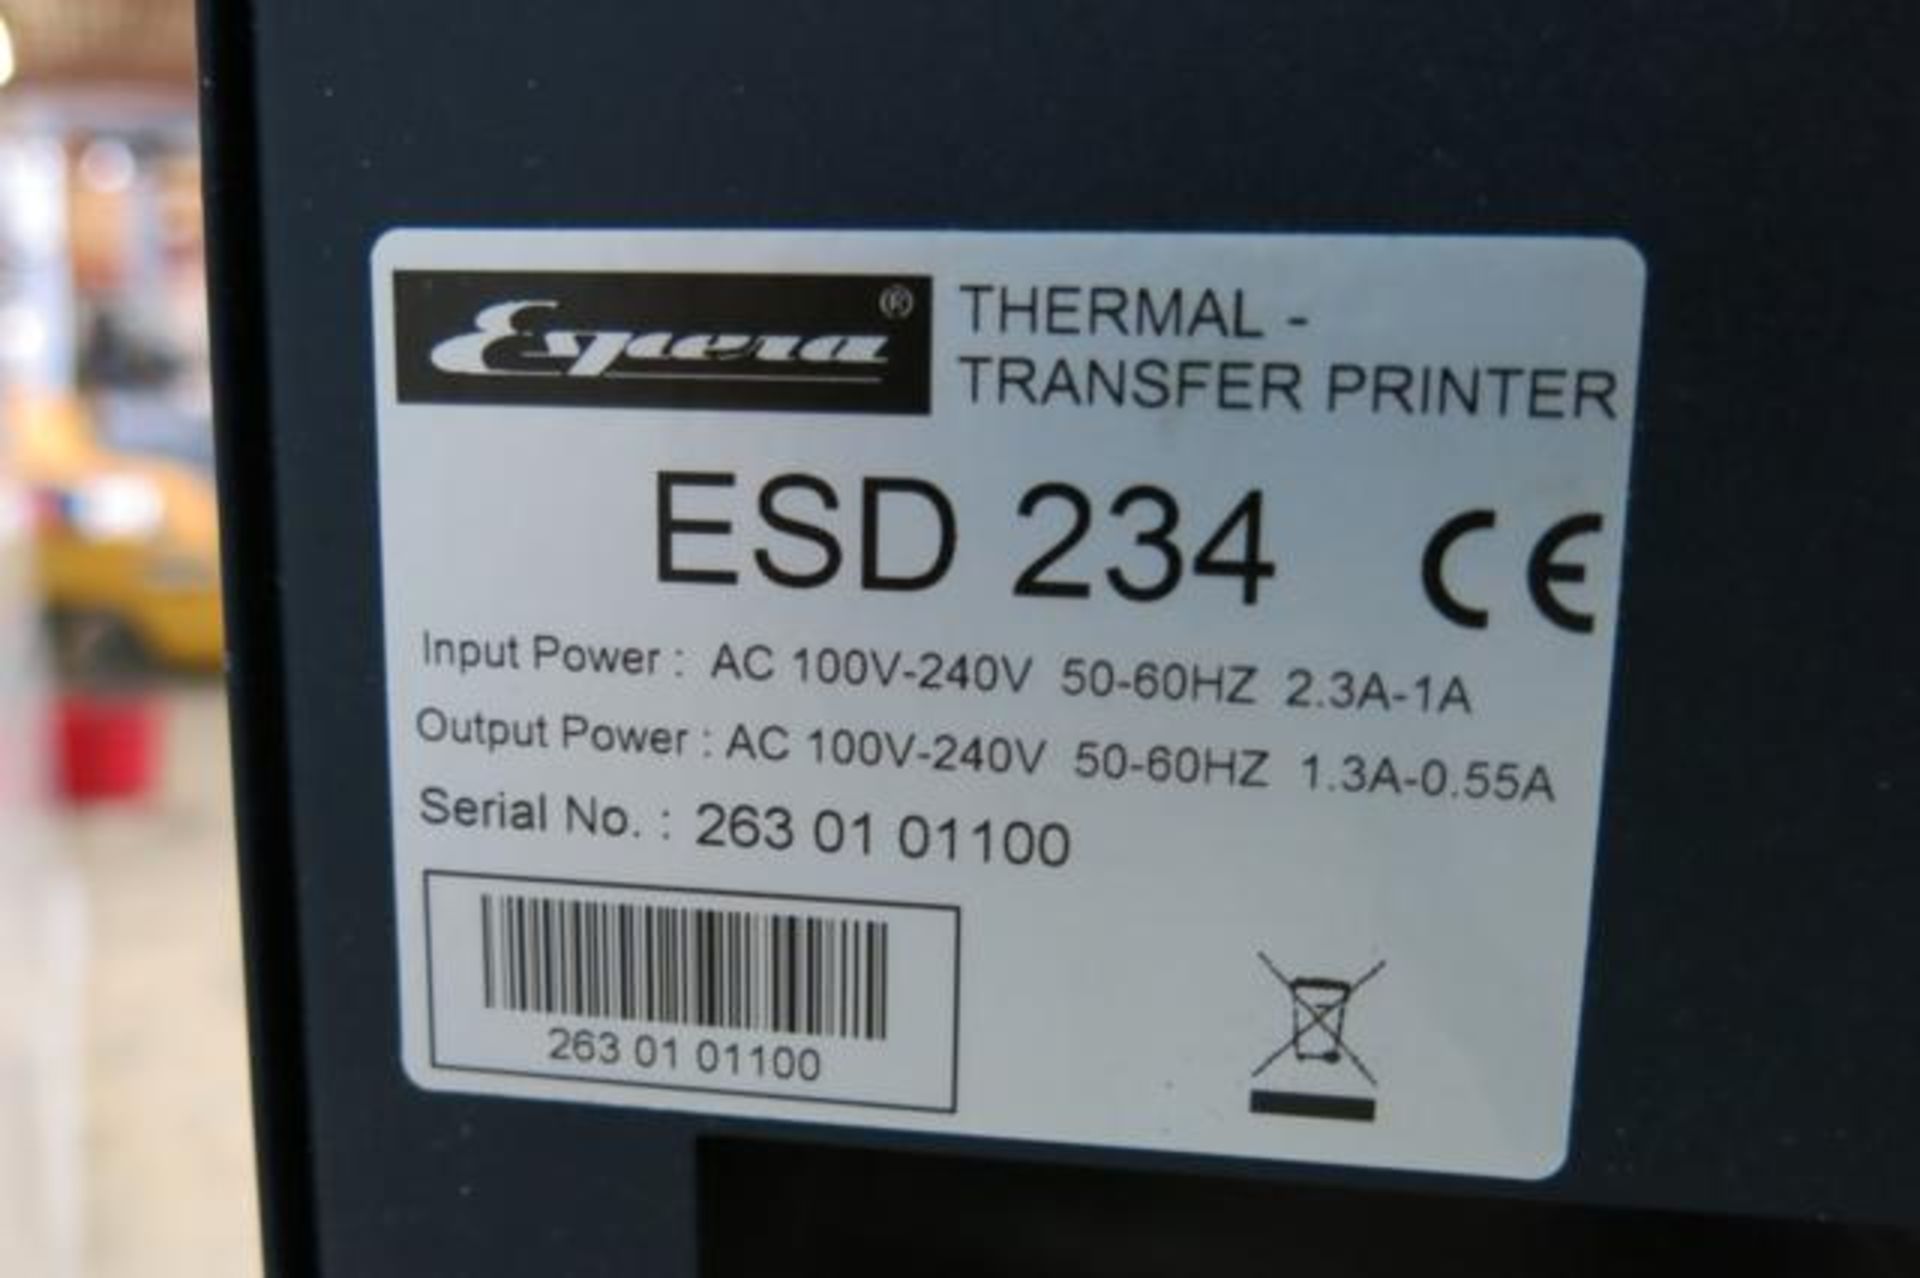 ESPERA, ESD 234, THERMAL TRANSFER PRINTER, S/N 263 01 01100 WITH STAINLESS STEEL TABLE - Image 7 of 7